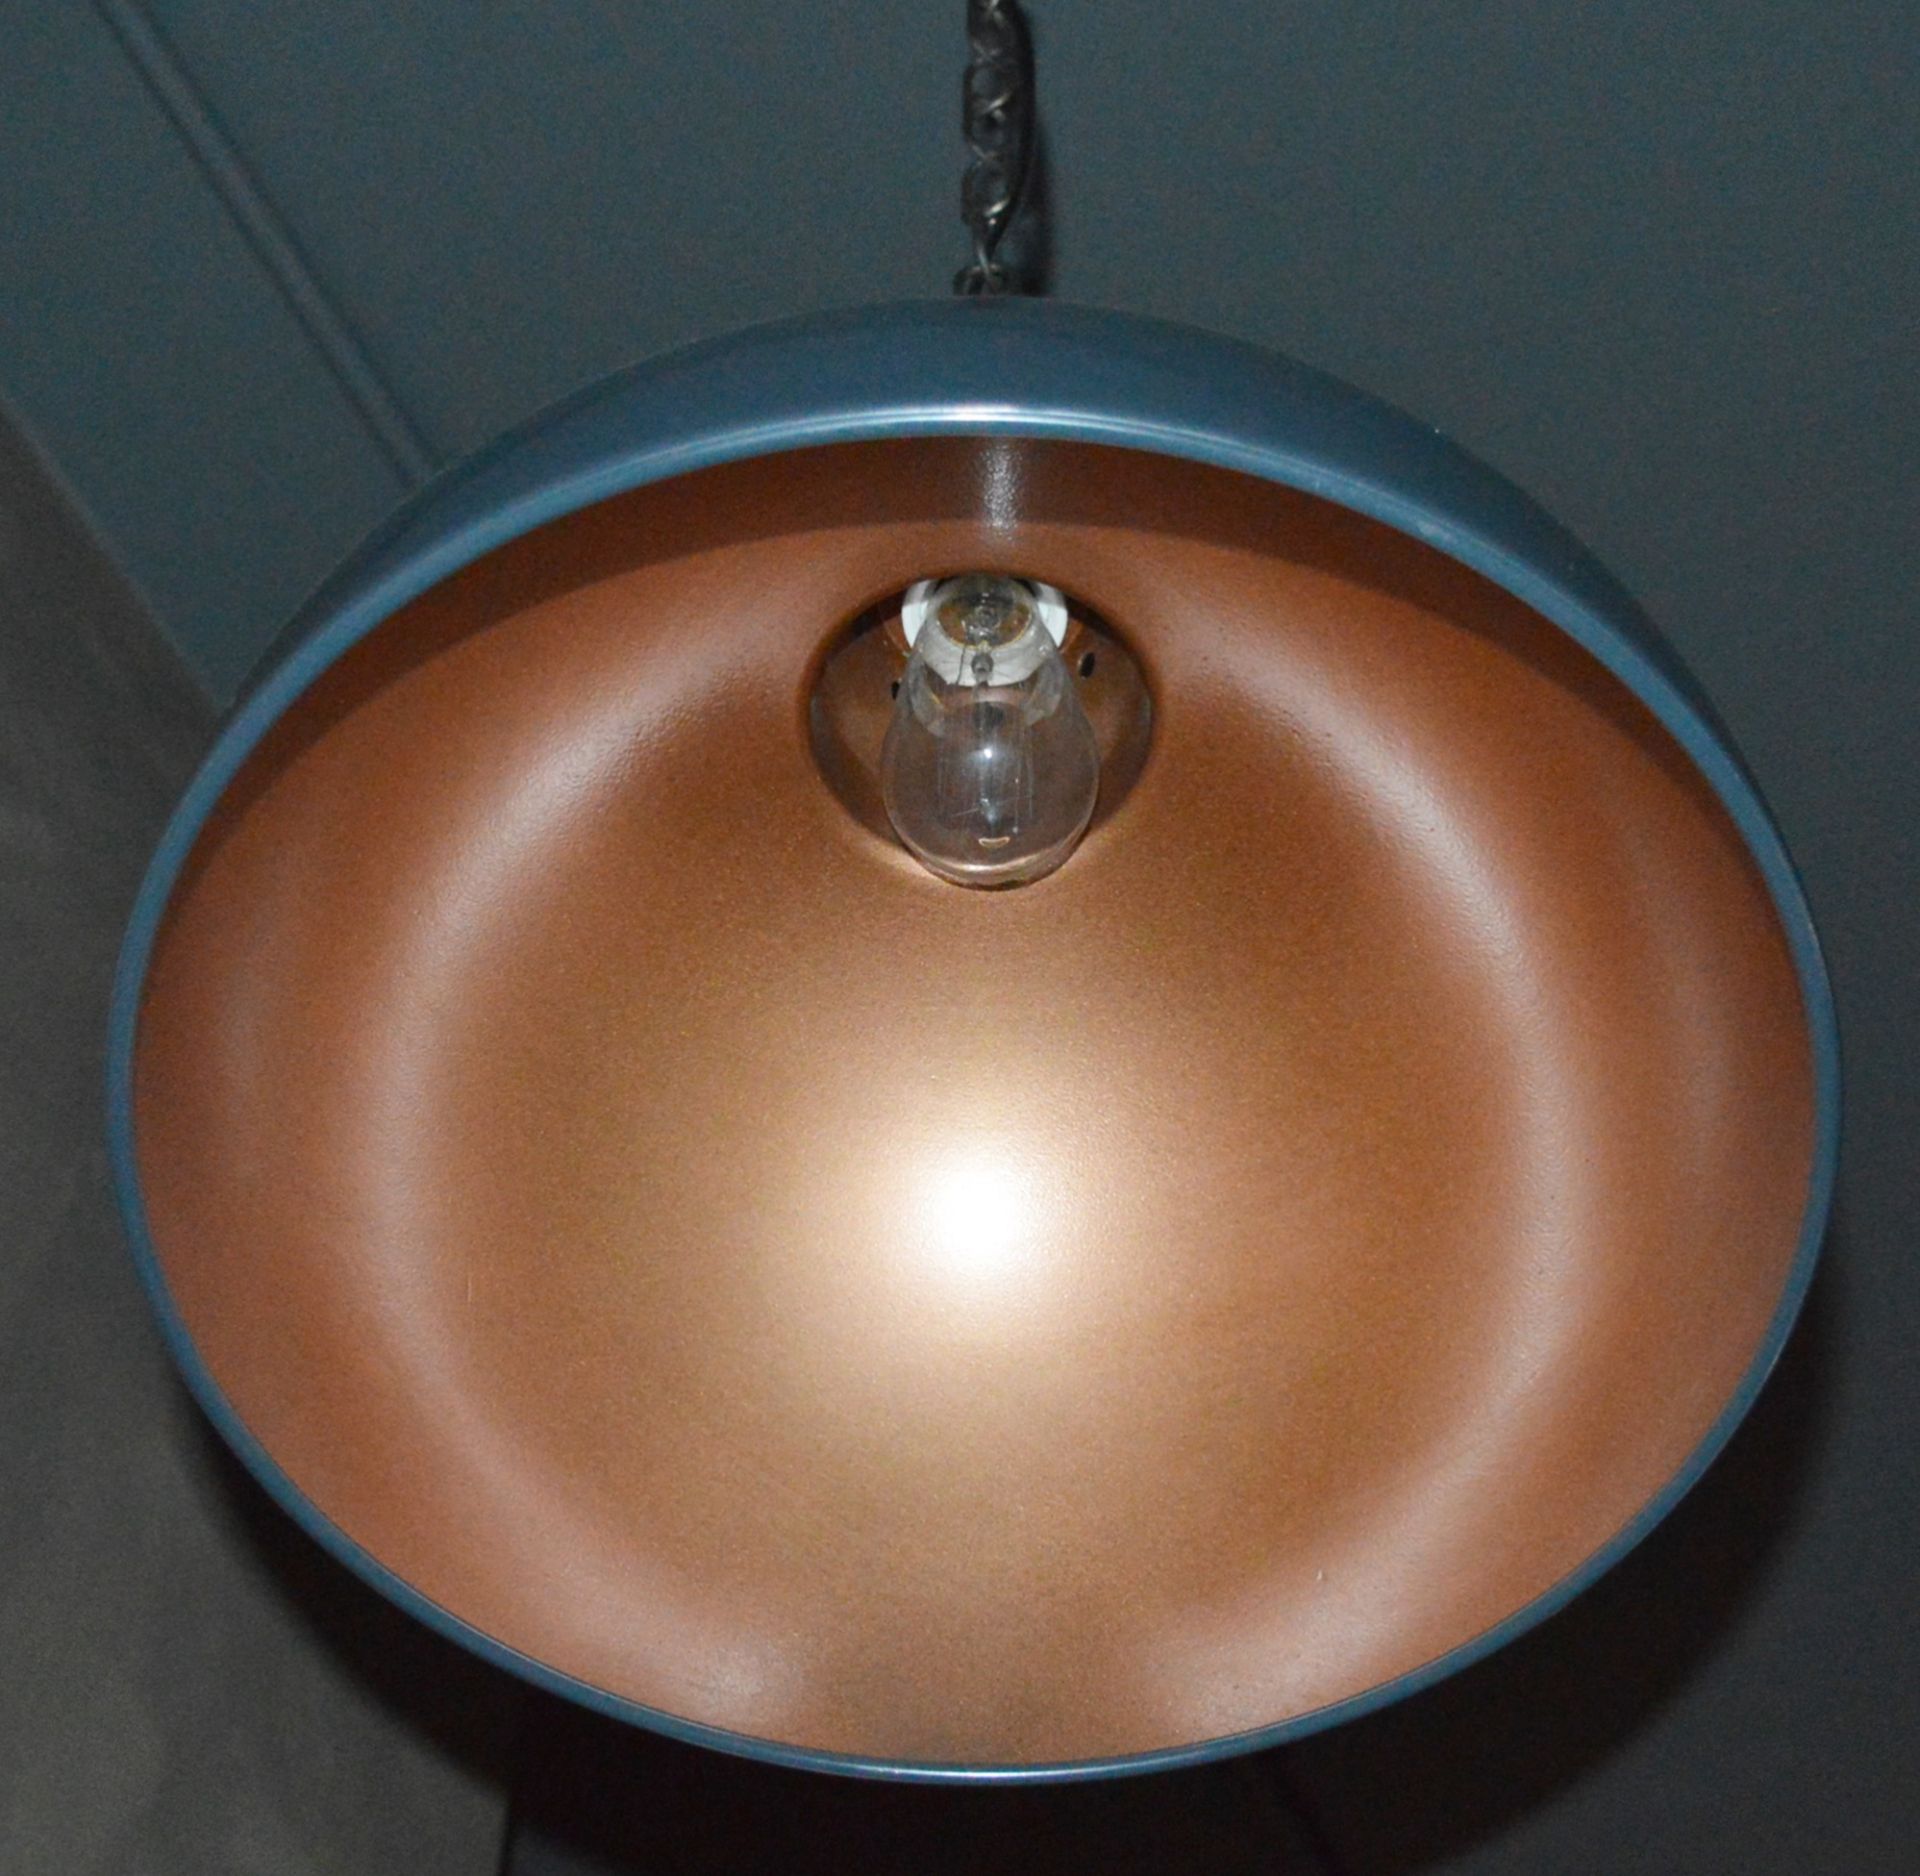 4 x Dome Pendant Ceiling Light Fittings - Grey Dome and Copper  - Vintage Style - 40cm Diameter - - Image 6 of 8